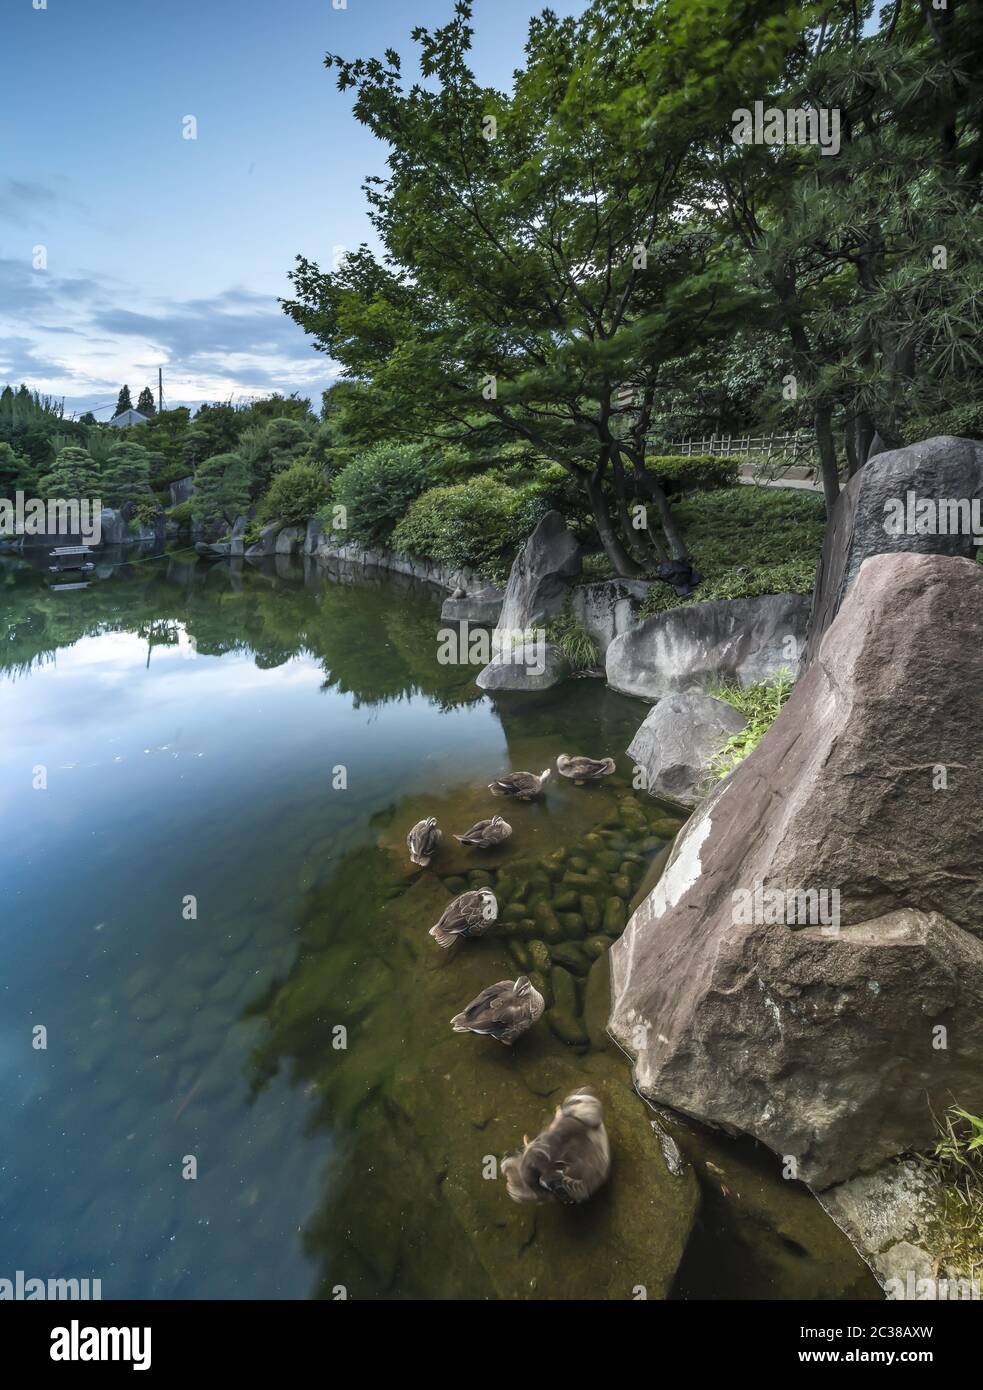 Central pond of Mejiro Garden where ducks are resting and which is surrounded by large rocks and sto Stock Photo